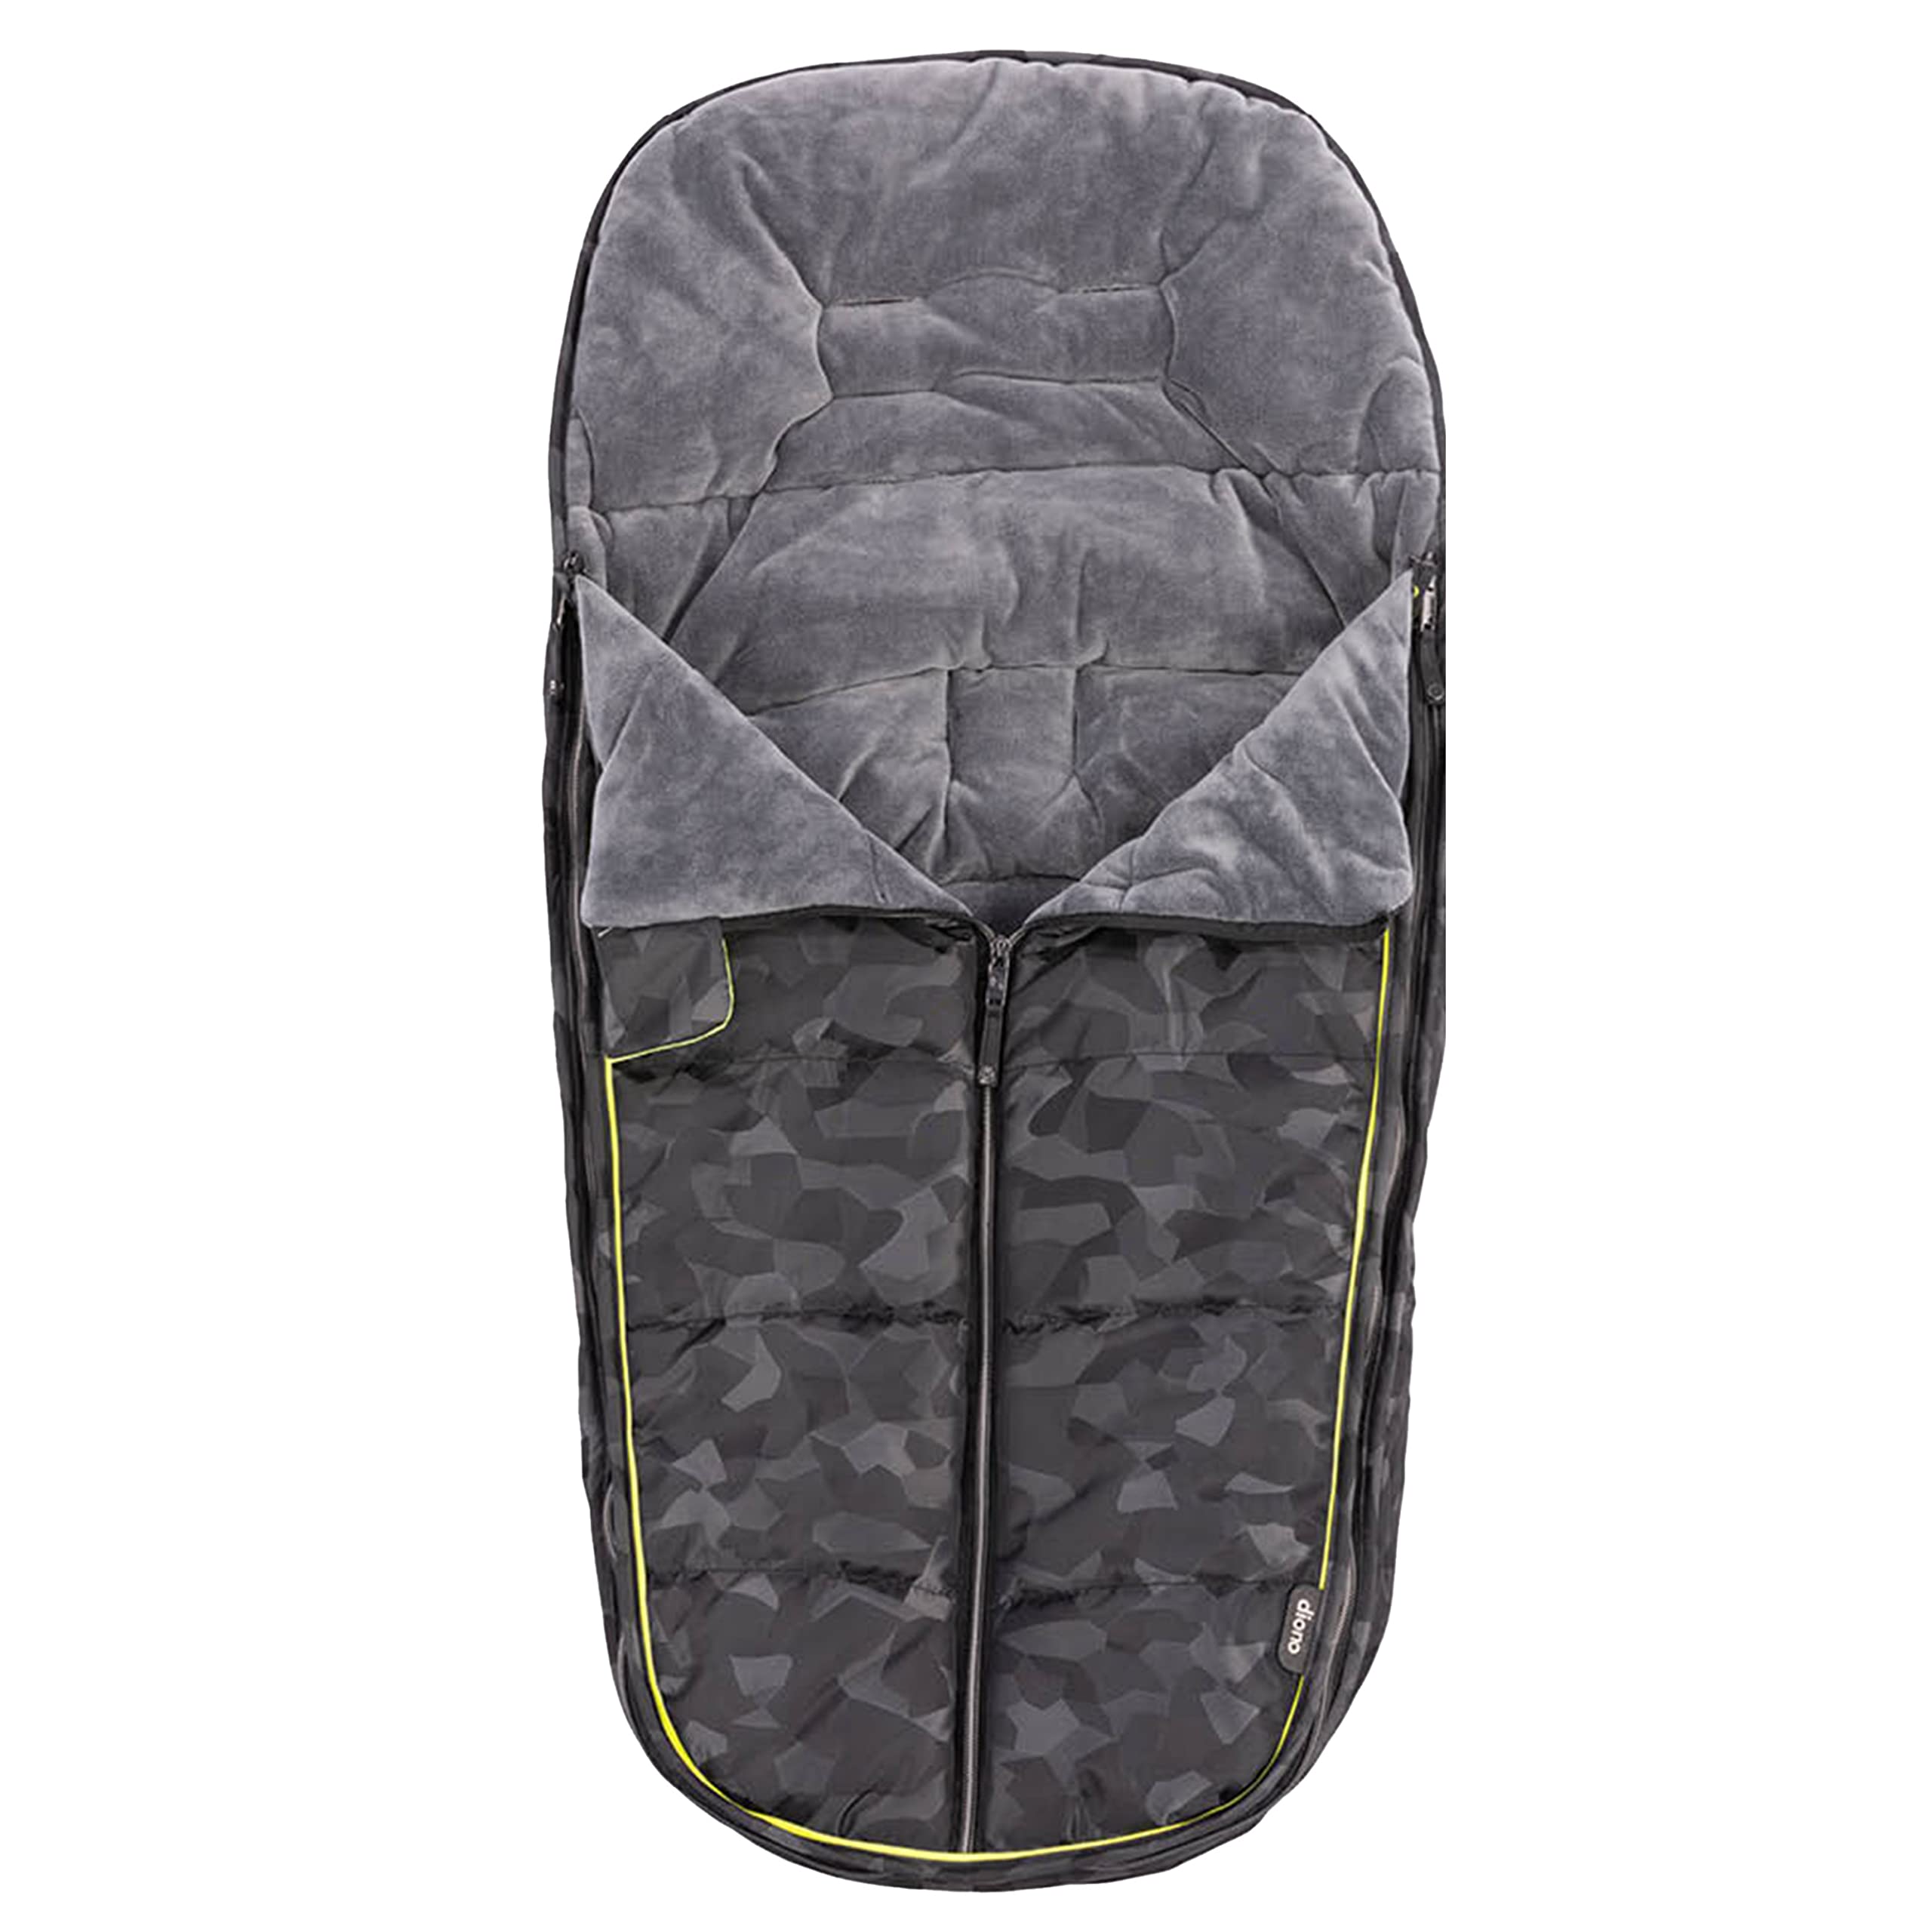 Diono Baby to Toddler All Weather Stroller Footmuff Luxe (Black Camo) & More $35 + Free Shipping